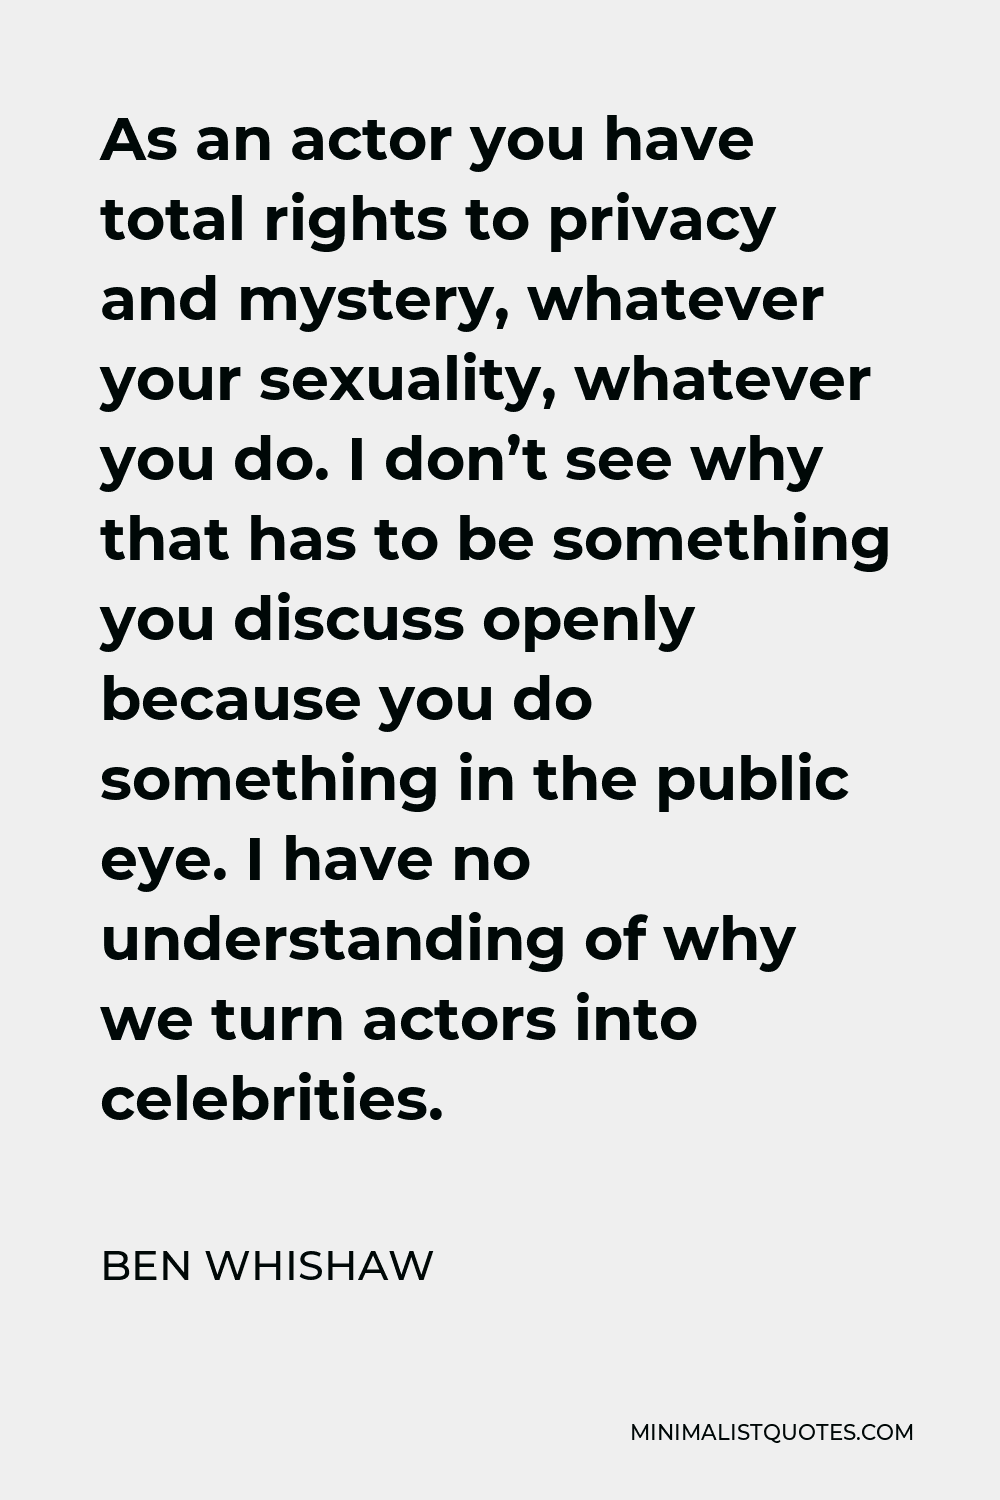 Ben Whishaw Quote - As an actor you have total rights to privacy and mystery, whatever your sexuality, whatever you do. I don’t see why that has to be something you discuss openly because you do something in the public eye. I have no understanding of why we turn actors into celebrities.